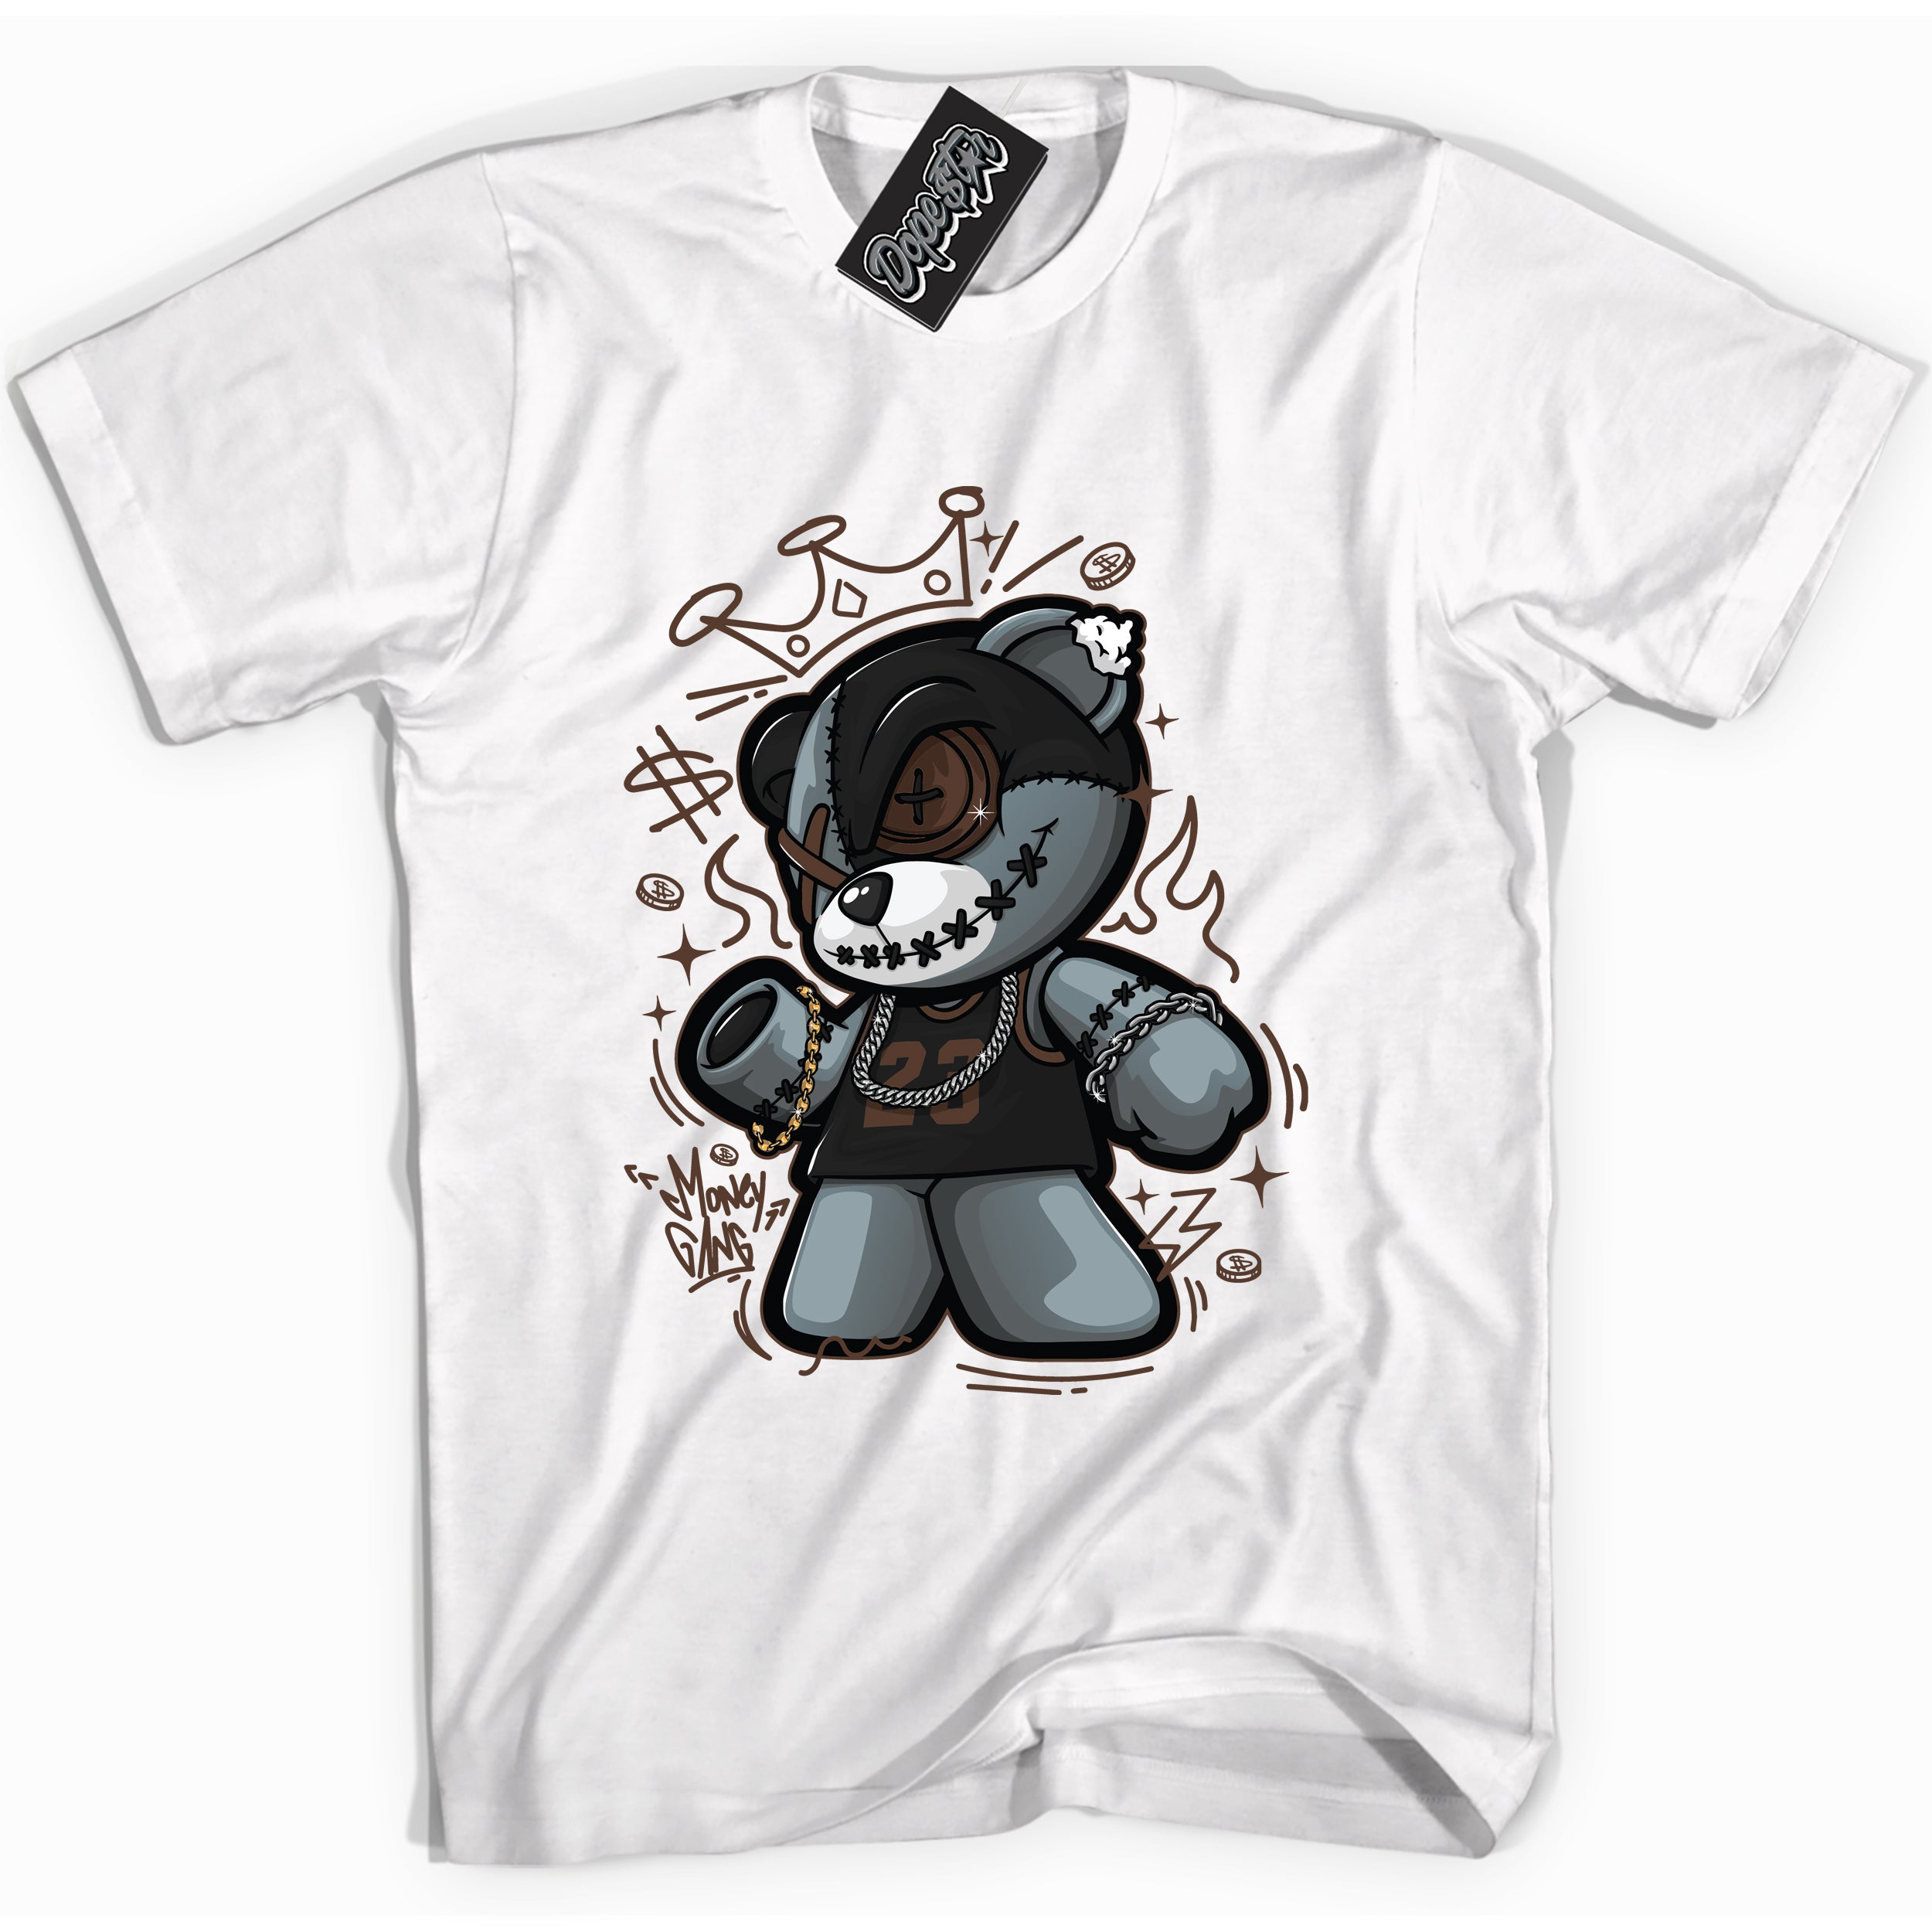 Cool White graphic tee with “ Money Gang Bear ” design, that perfectly matches Palomino 1s sneakers 